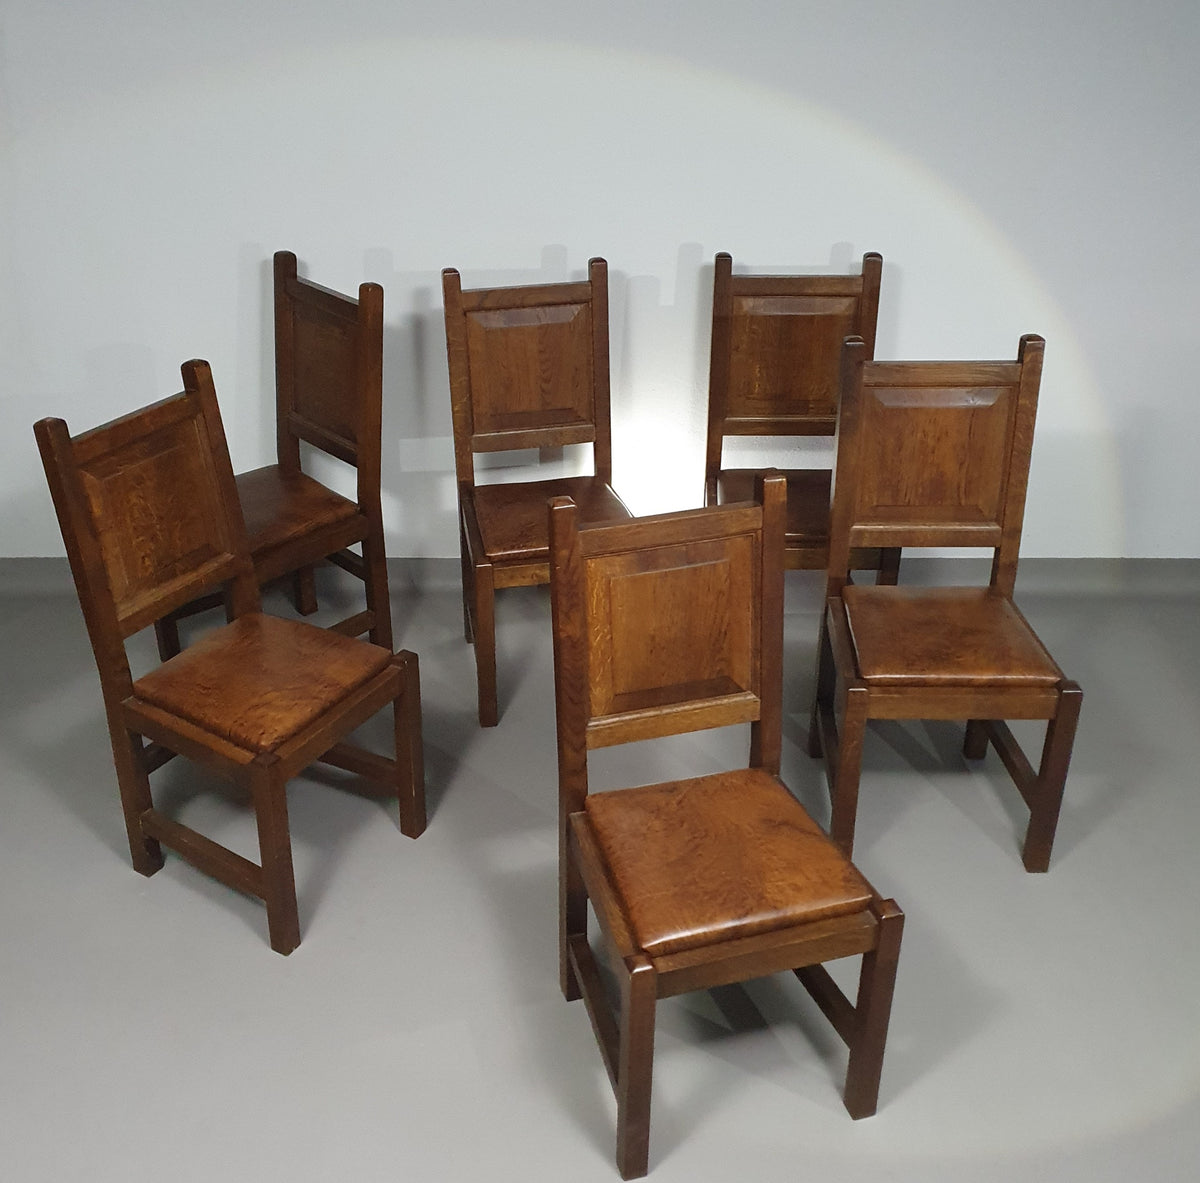 6 x Brutalist solid oak chairs mid century